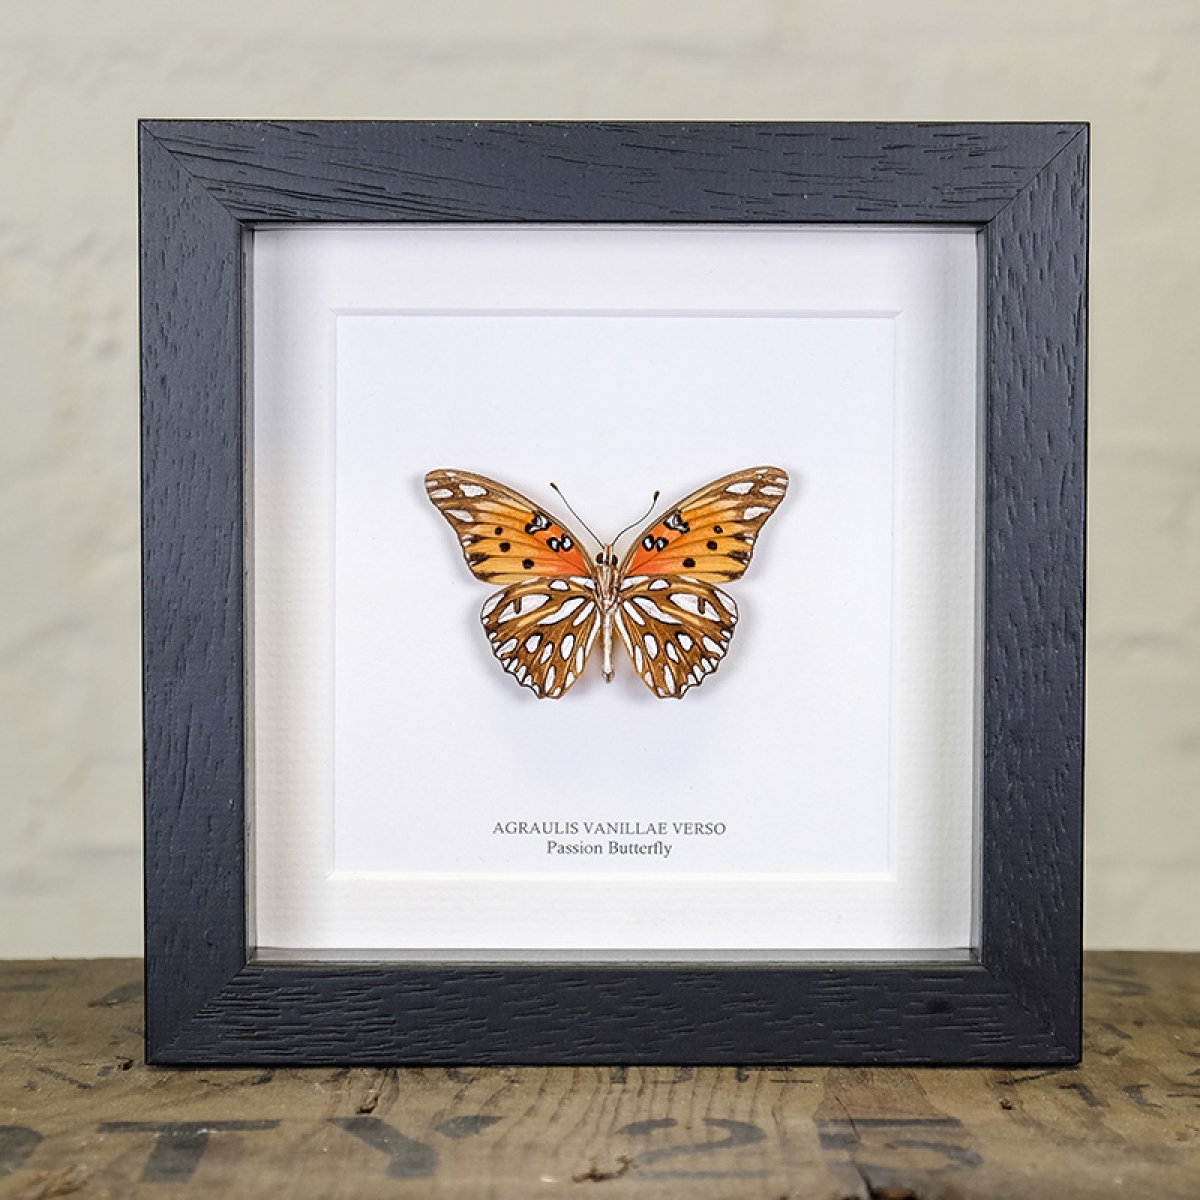 Minibeast Passion Butterfly in Box Frame (Agraulis vanillae verso)